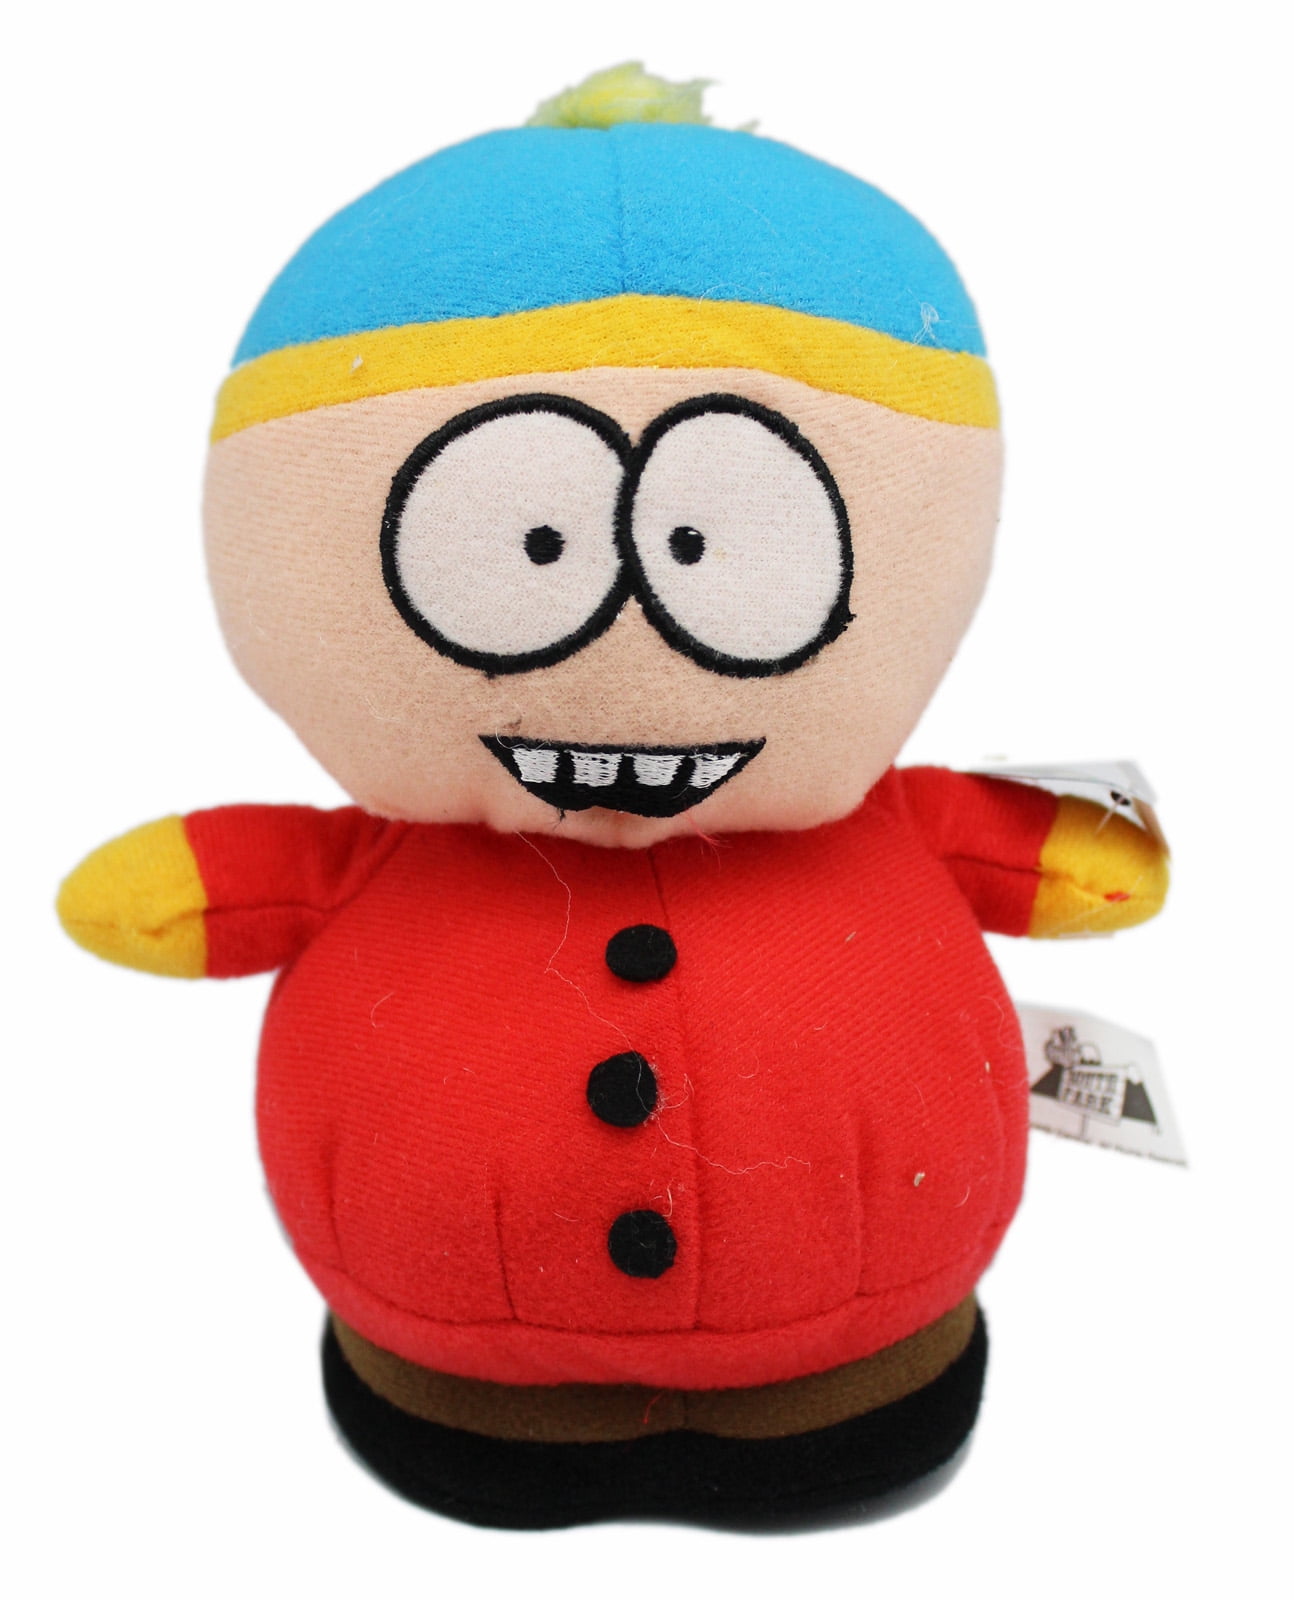 Rare South Park Plush Toy Butters Plush Toy Large 8.5 inches New 